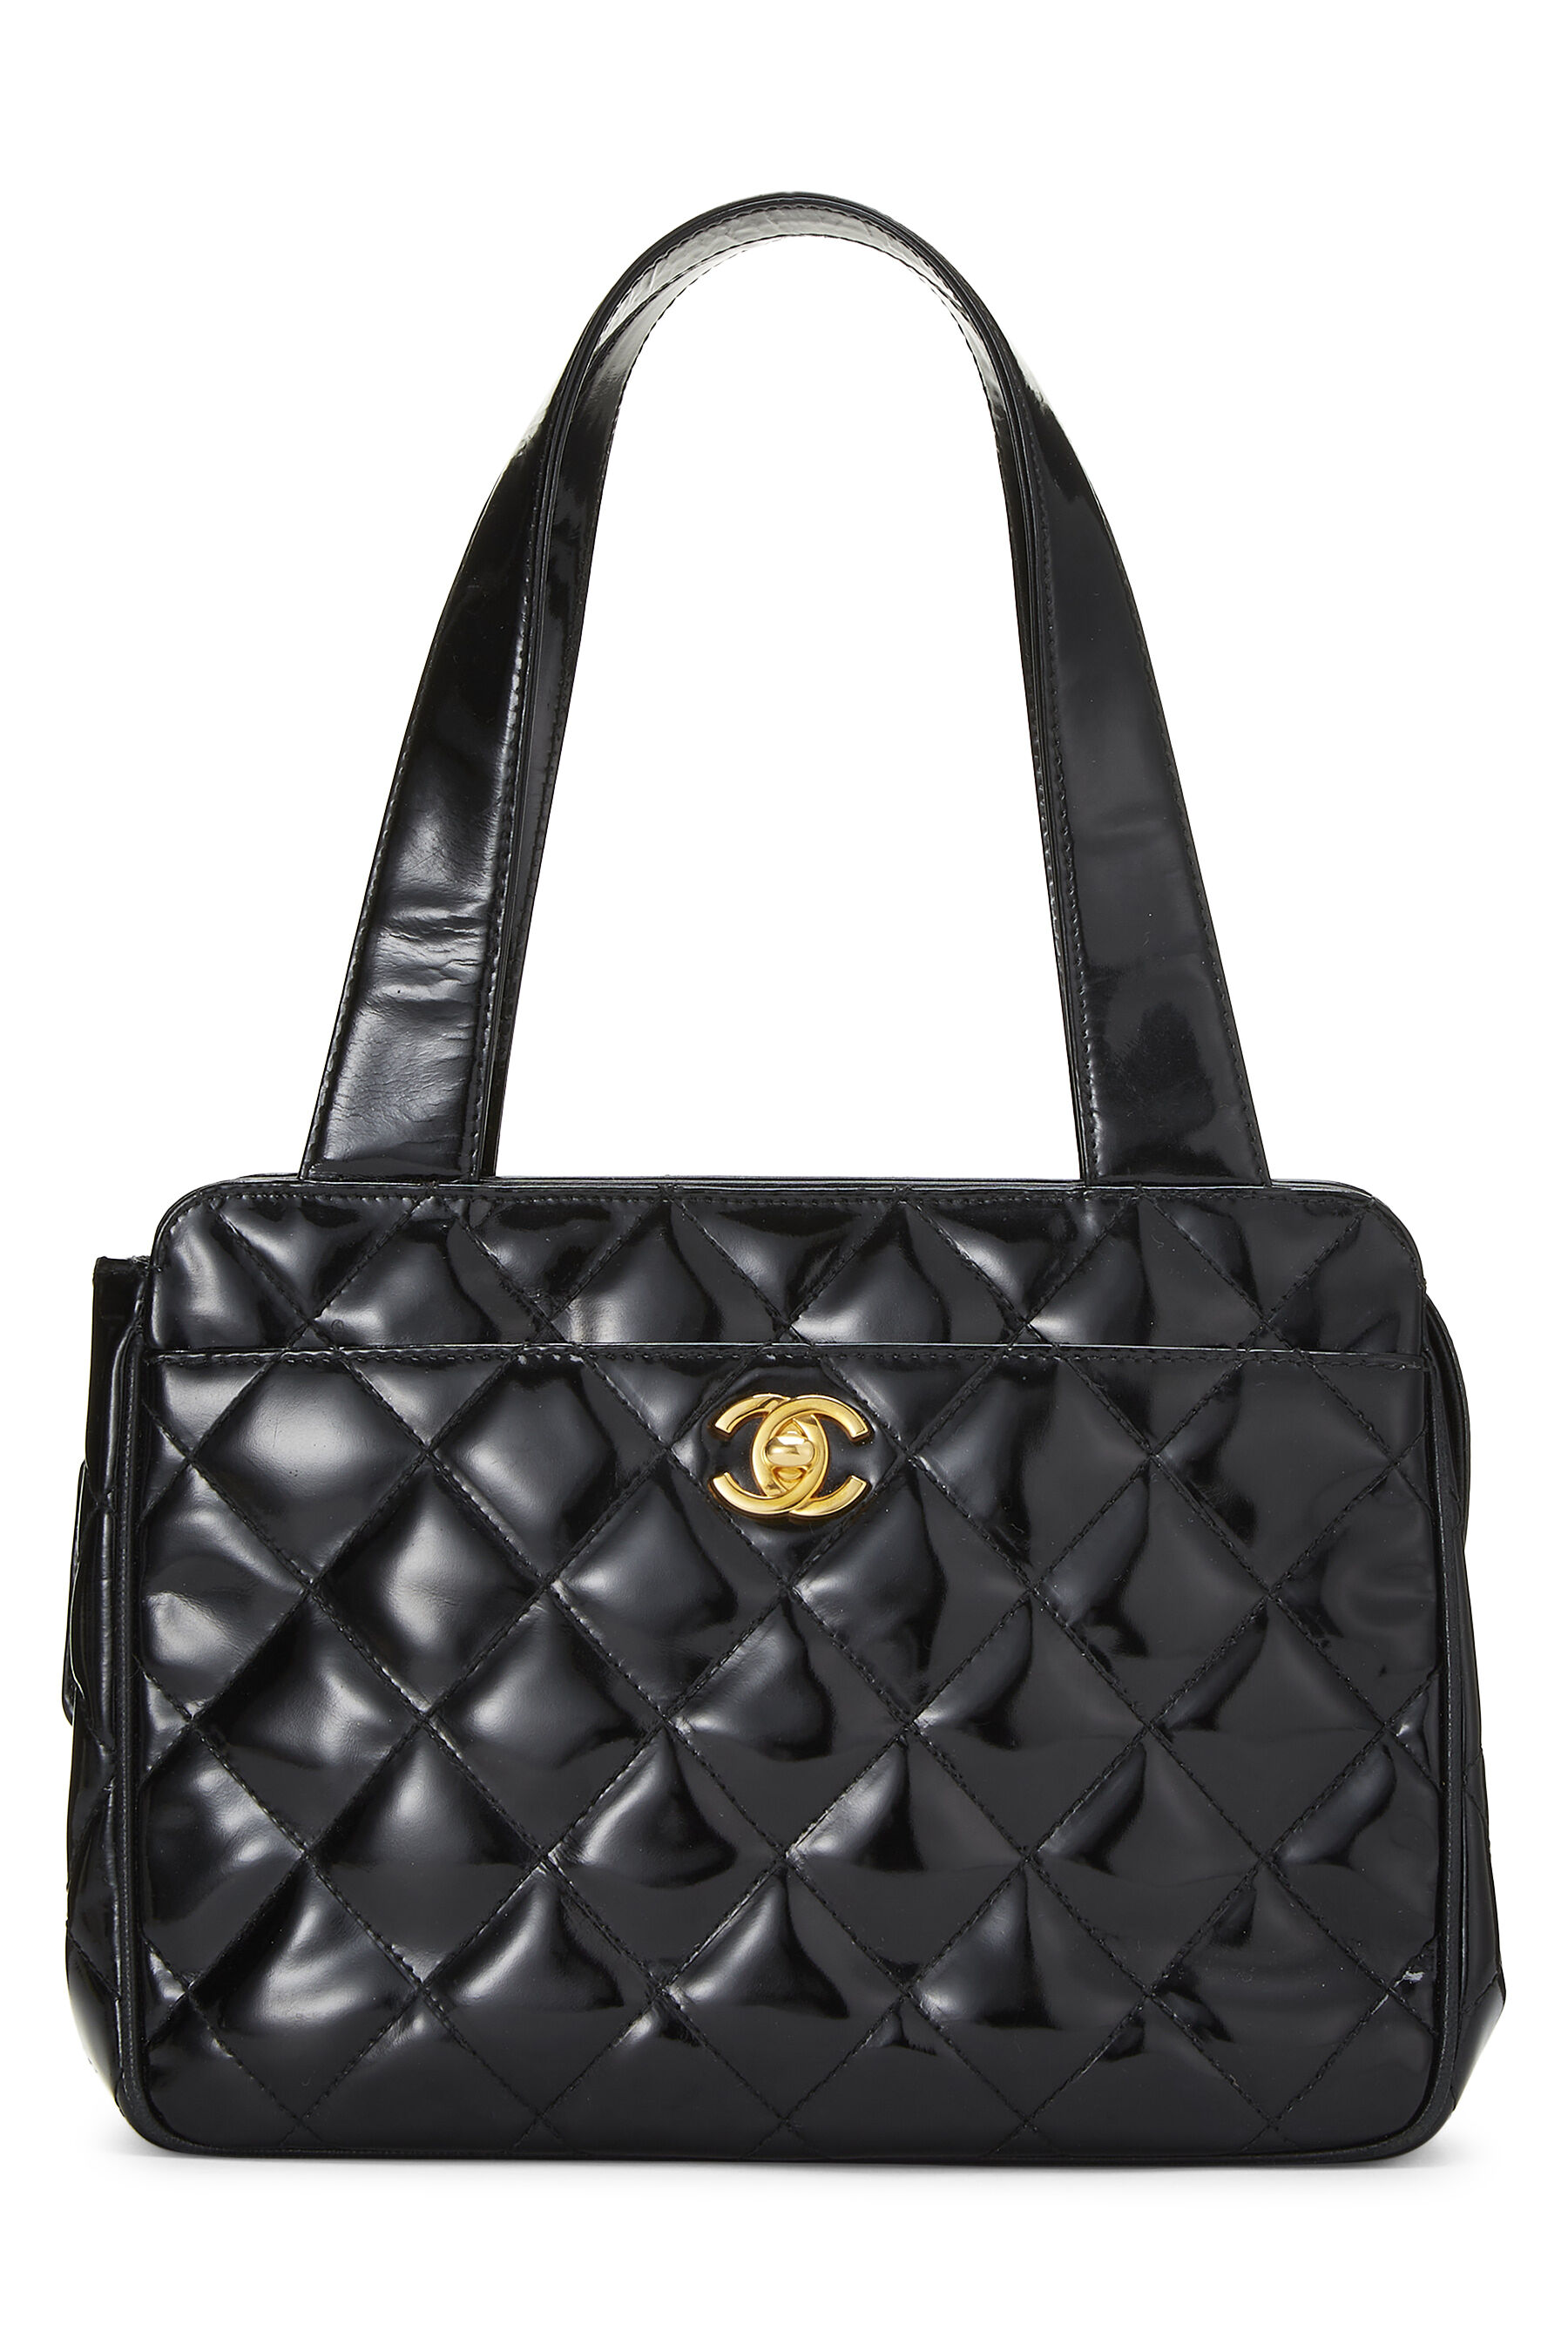 Chanel - Black Quilted Patent Leather Handbag Small